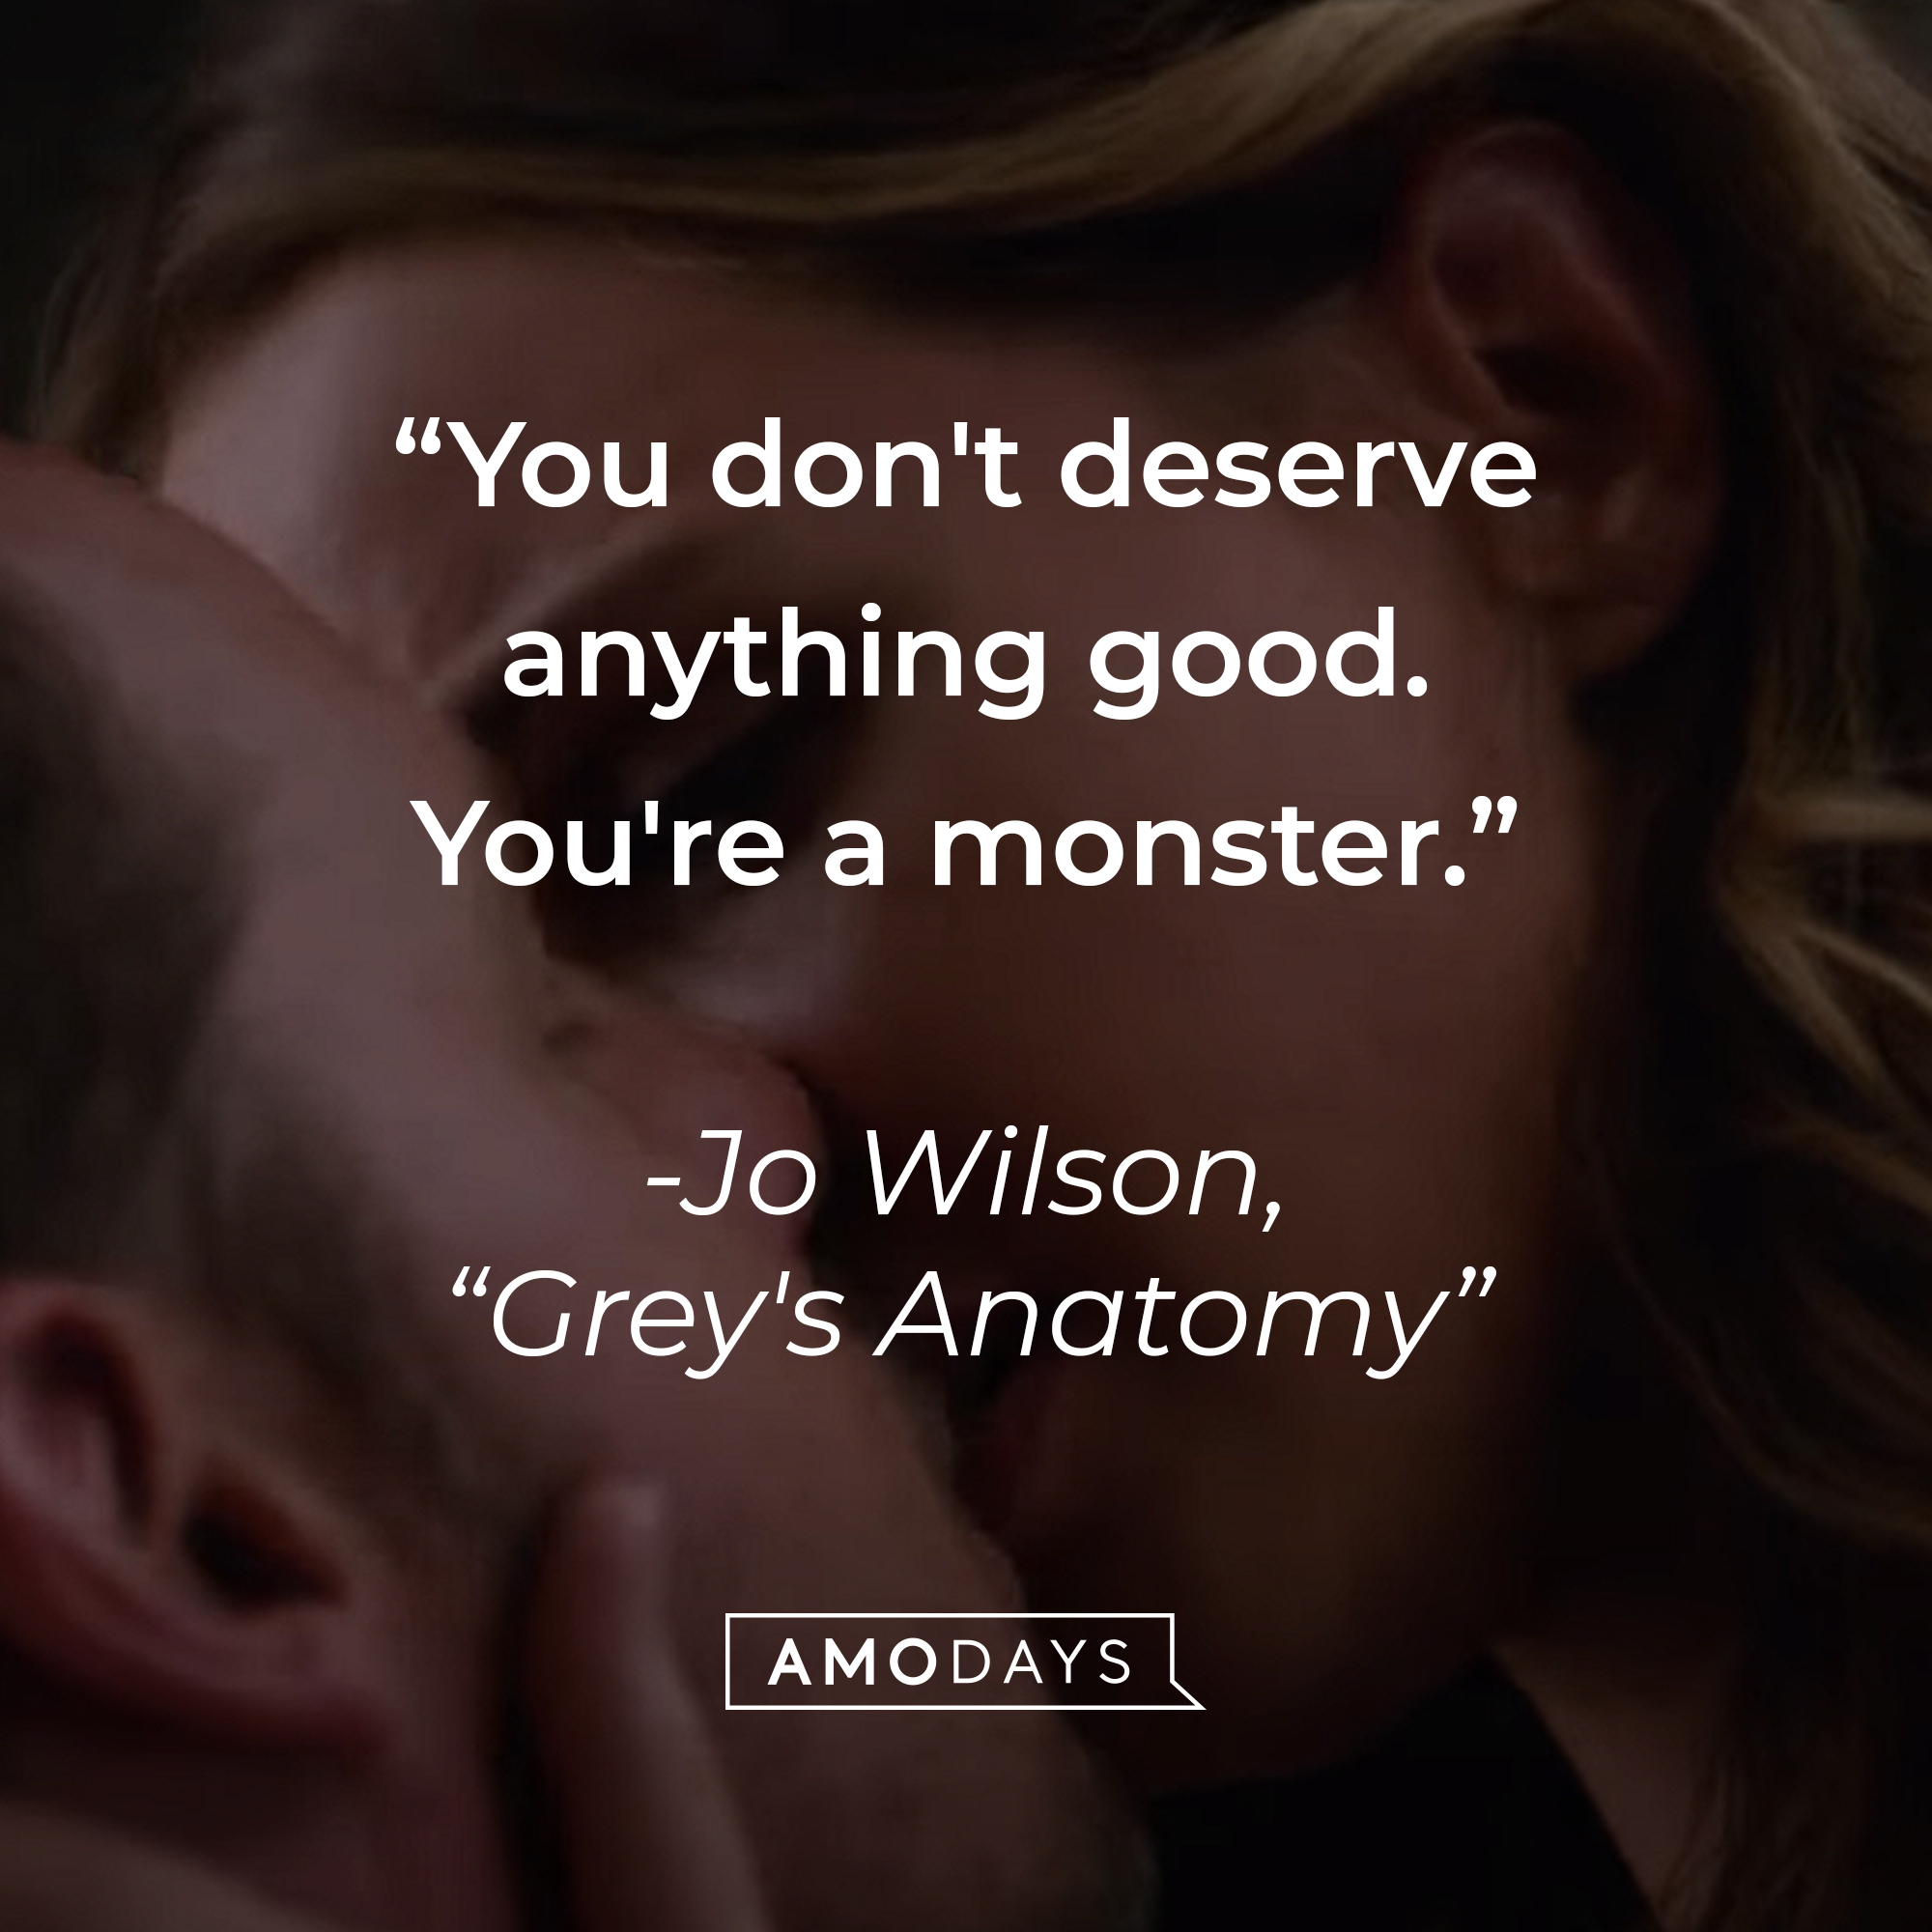 Jo Wilson’s quote from “Grey’s Anatomy”: “You don't deserve anything good. You're a monster.” | Source: youtube.com/ABCNetwork